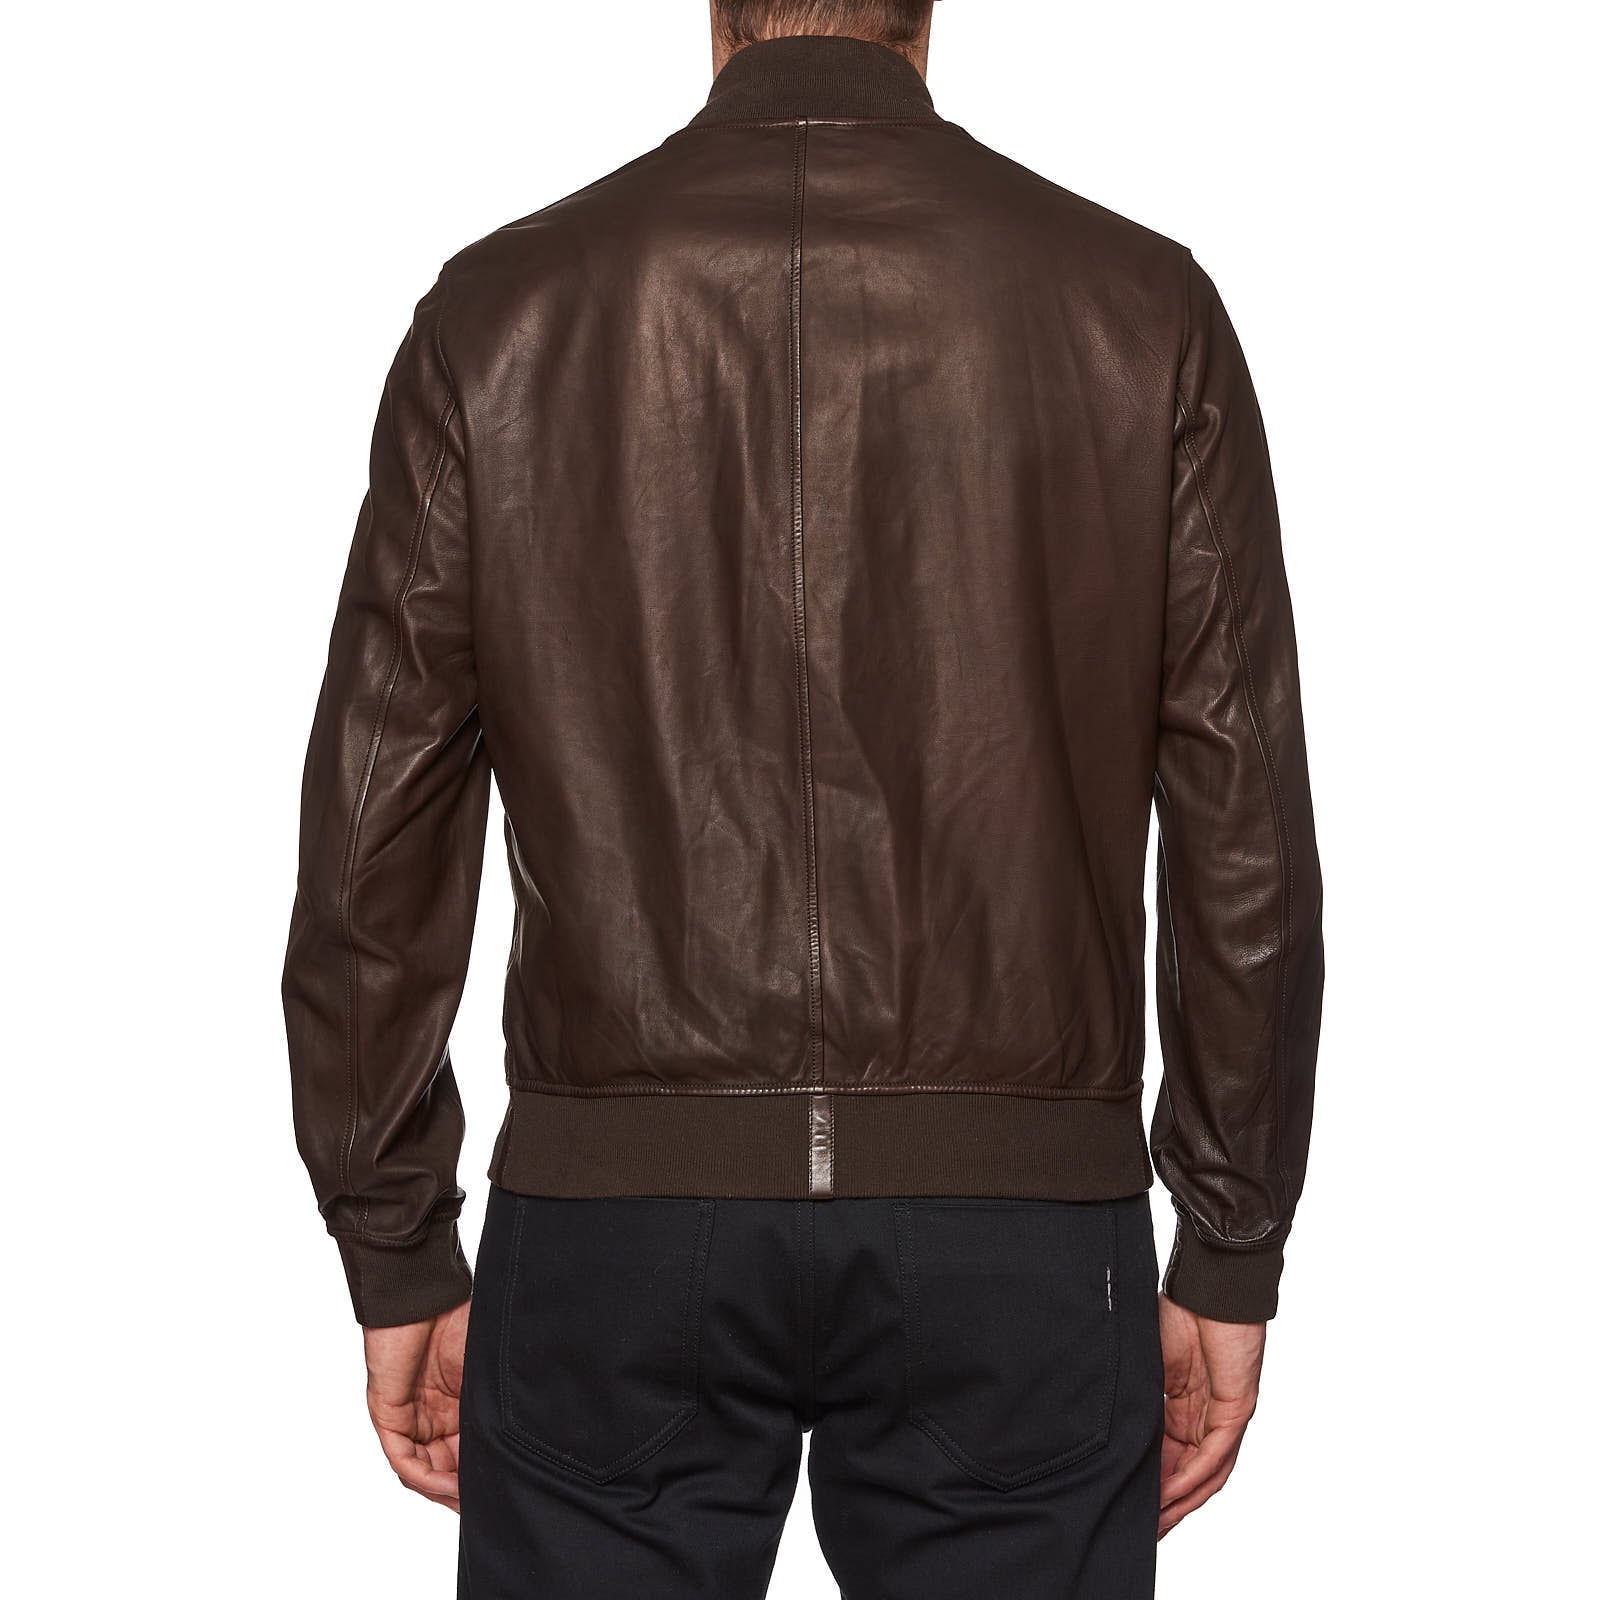 SERAPHIN Brown Lamb Leather Unlined Bomber Jacket FR 50 US M SERAPHIN